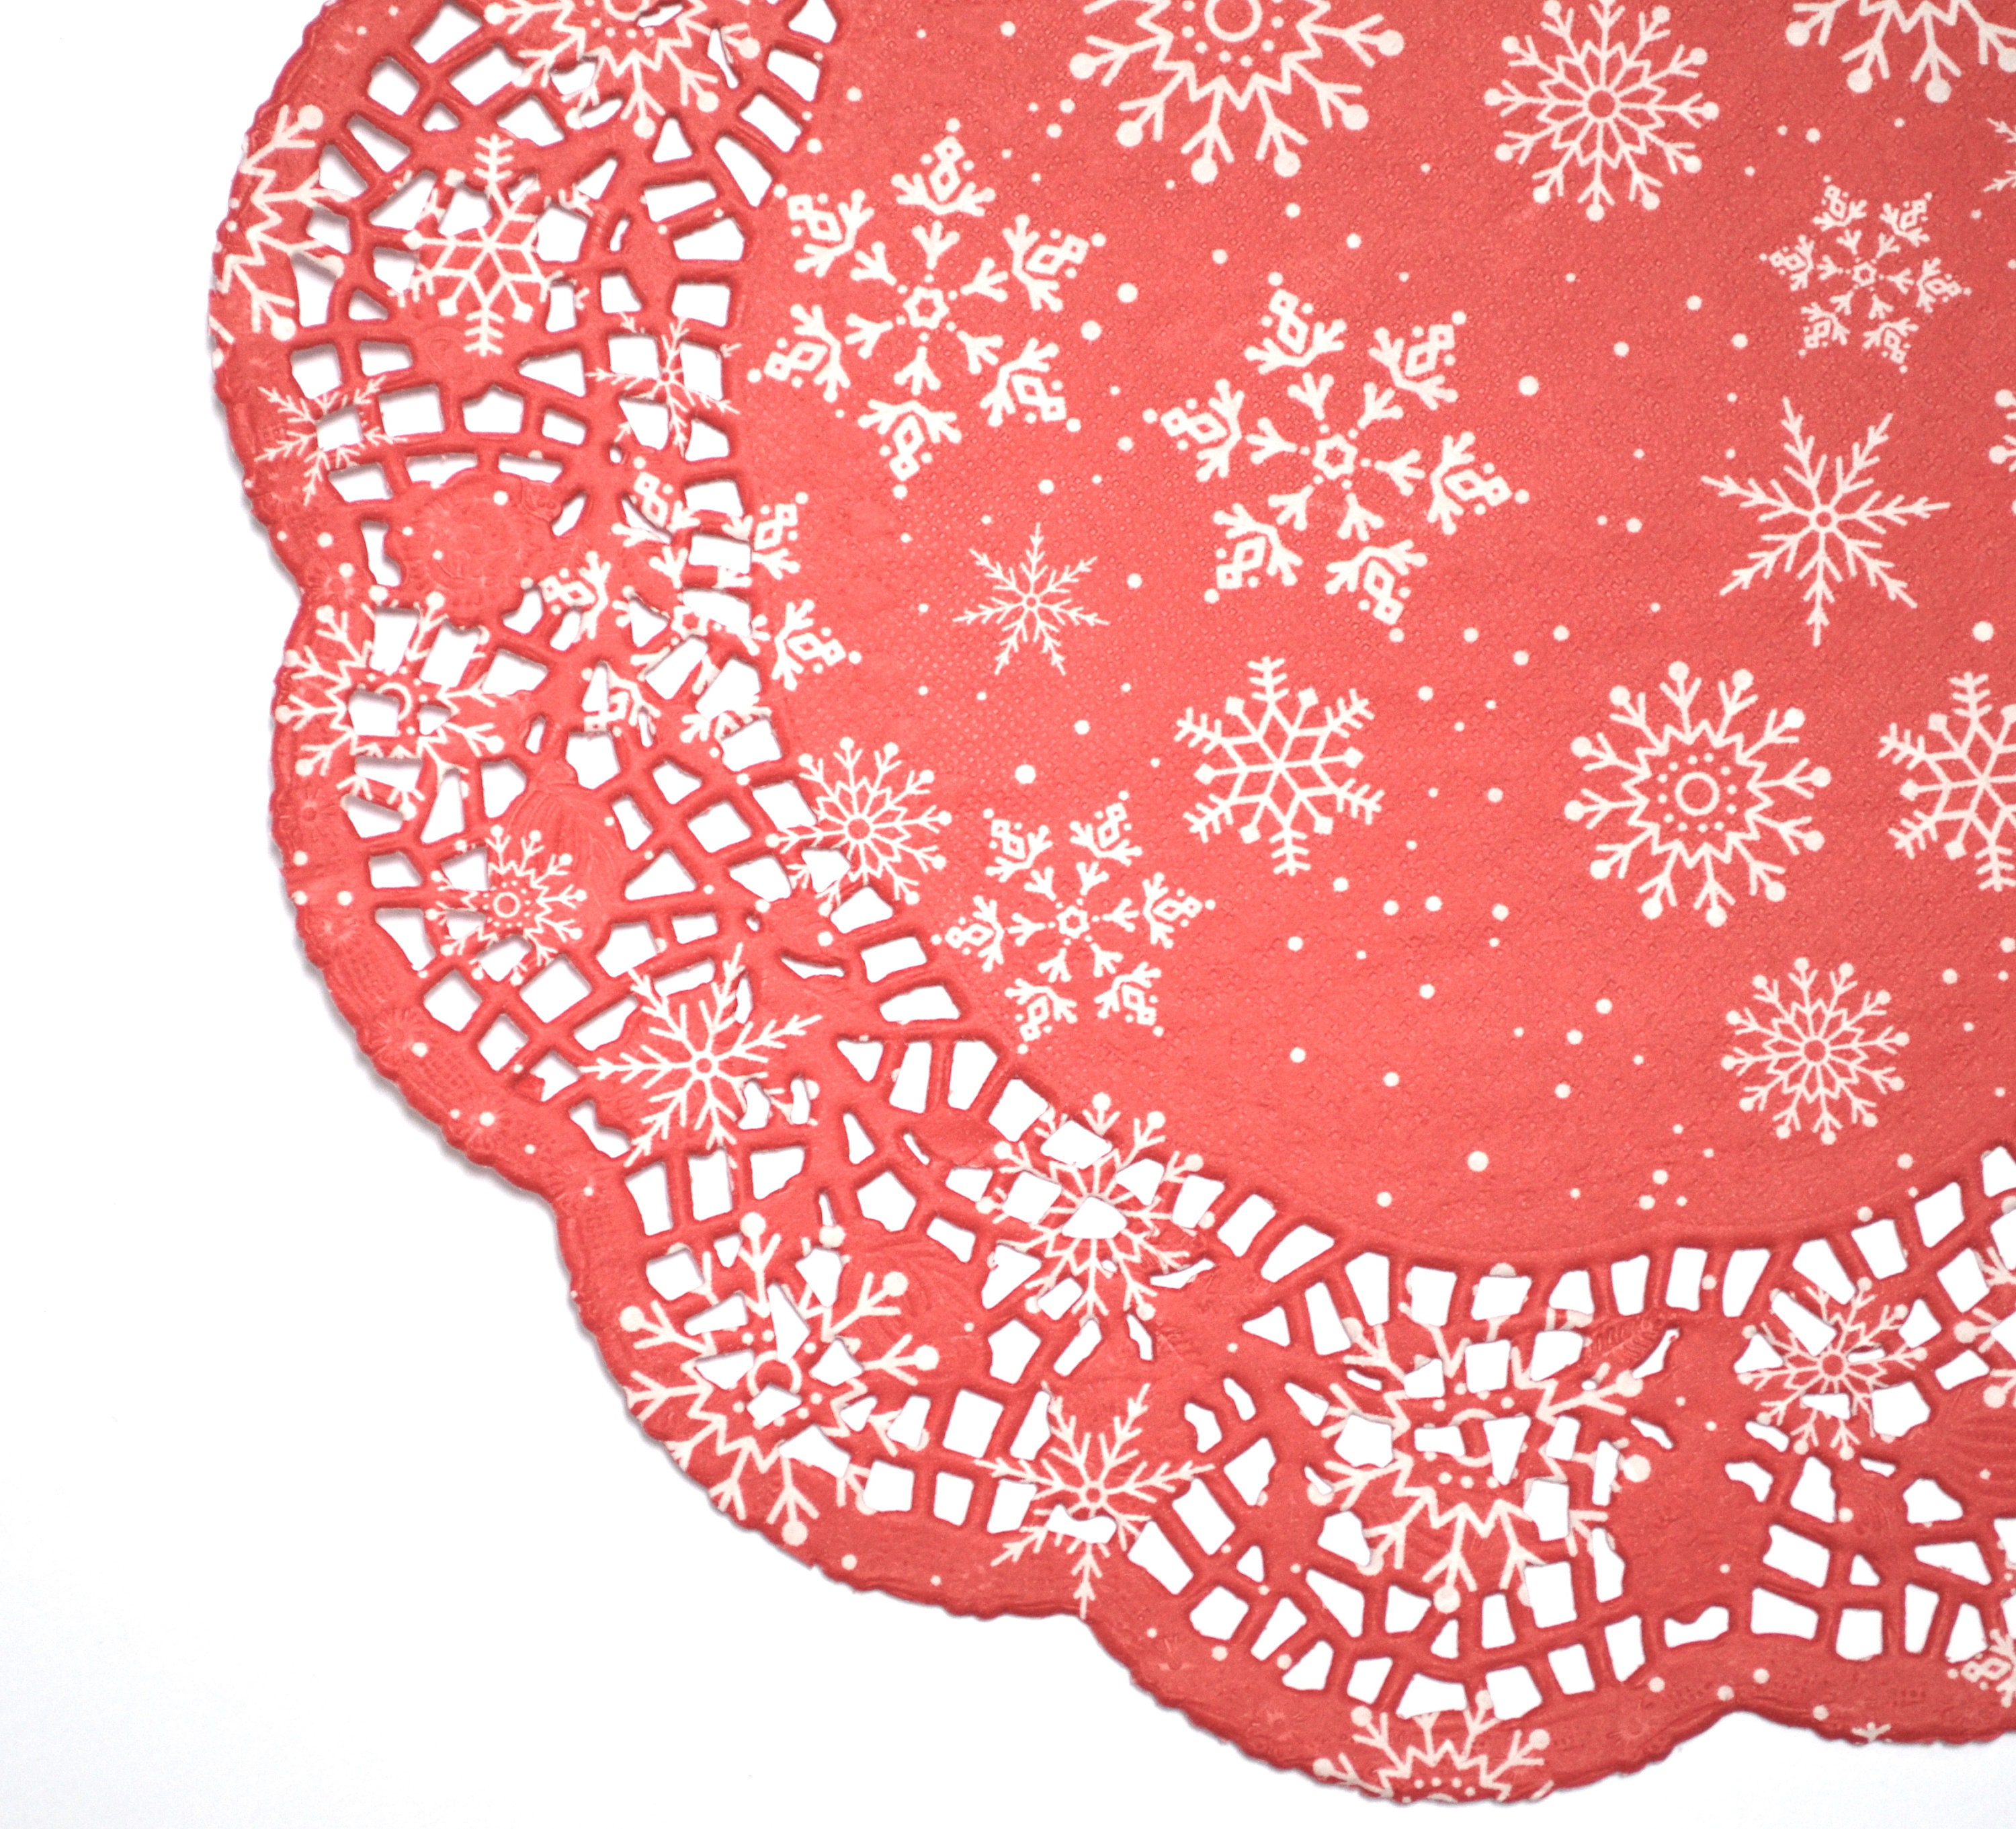 12 Inch White French Lace Paper Doilies 50 Count – PEPPERLONELY – Beads,  Buttons, Crafts, Ribbons, Jewelry Findings